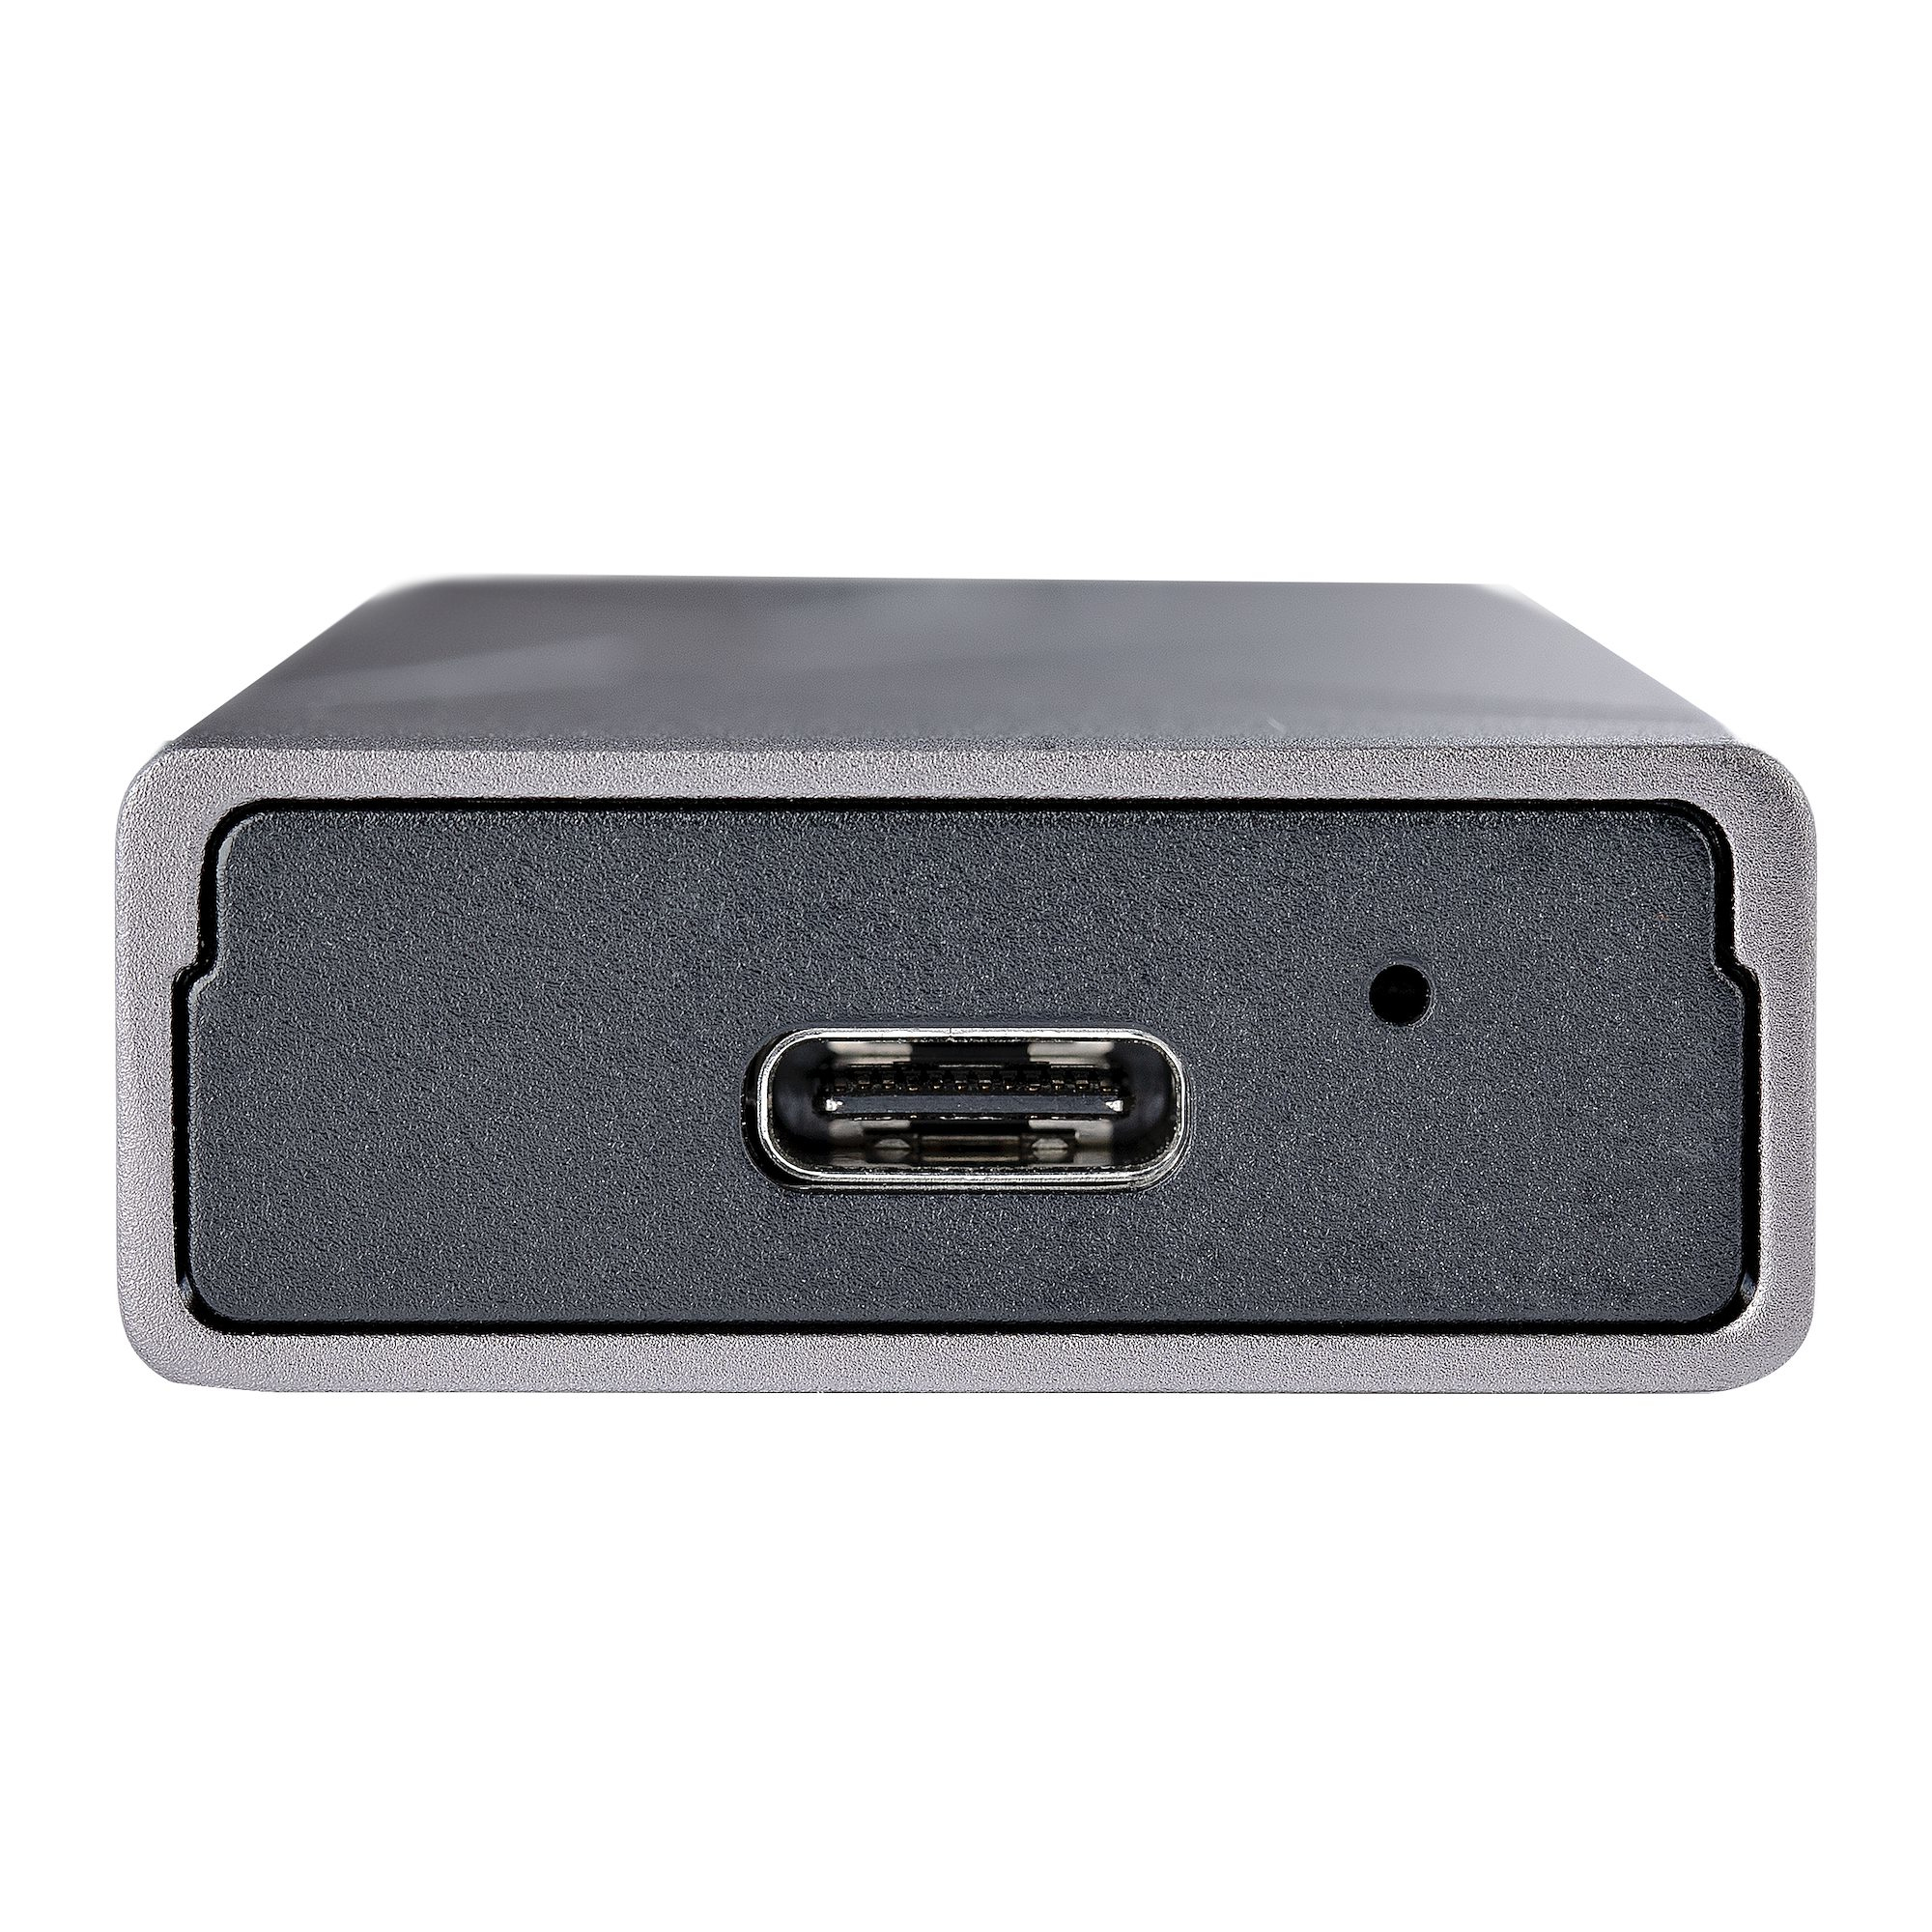 StarTech.com USB-C 10Gbps to M.2 NVMe or M.2 SATA SSD Enclosure - Tool-free External M.2 PCIe/SATA NGFF SSD Aluminum Case - USB Type-C&A Host Cables - Supports 2230/2242/2260/2280, SSD enclosure, M.2, M.2, 10 Gbit/s, USB connectivity, Grey